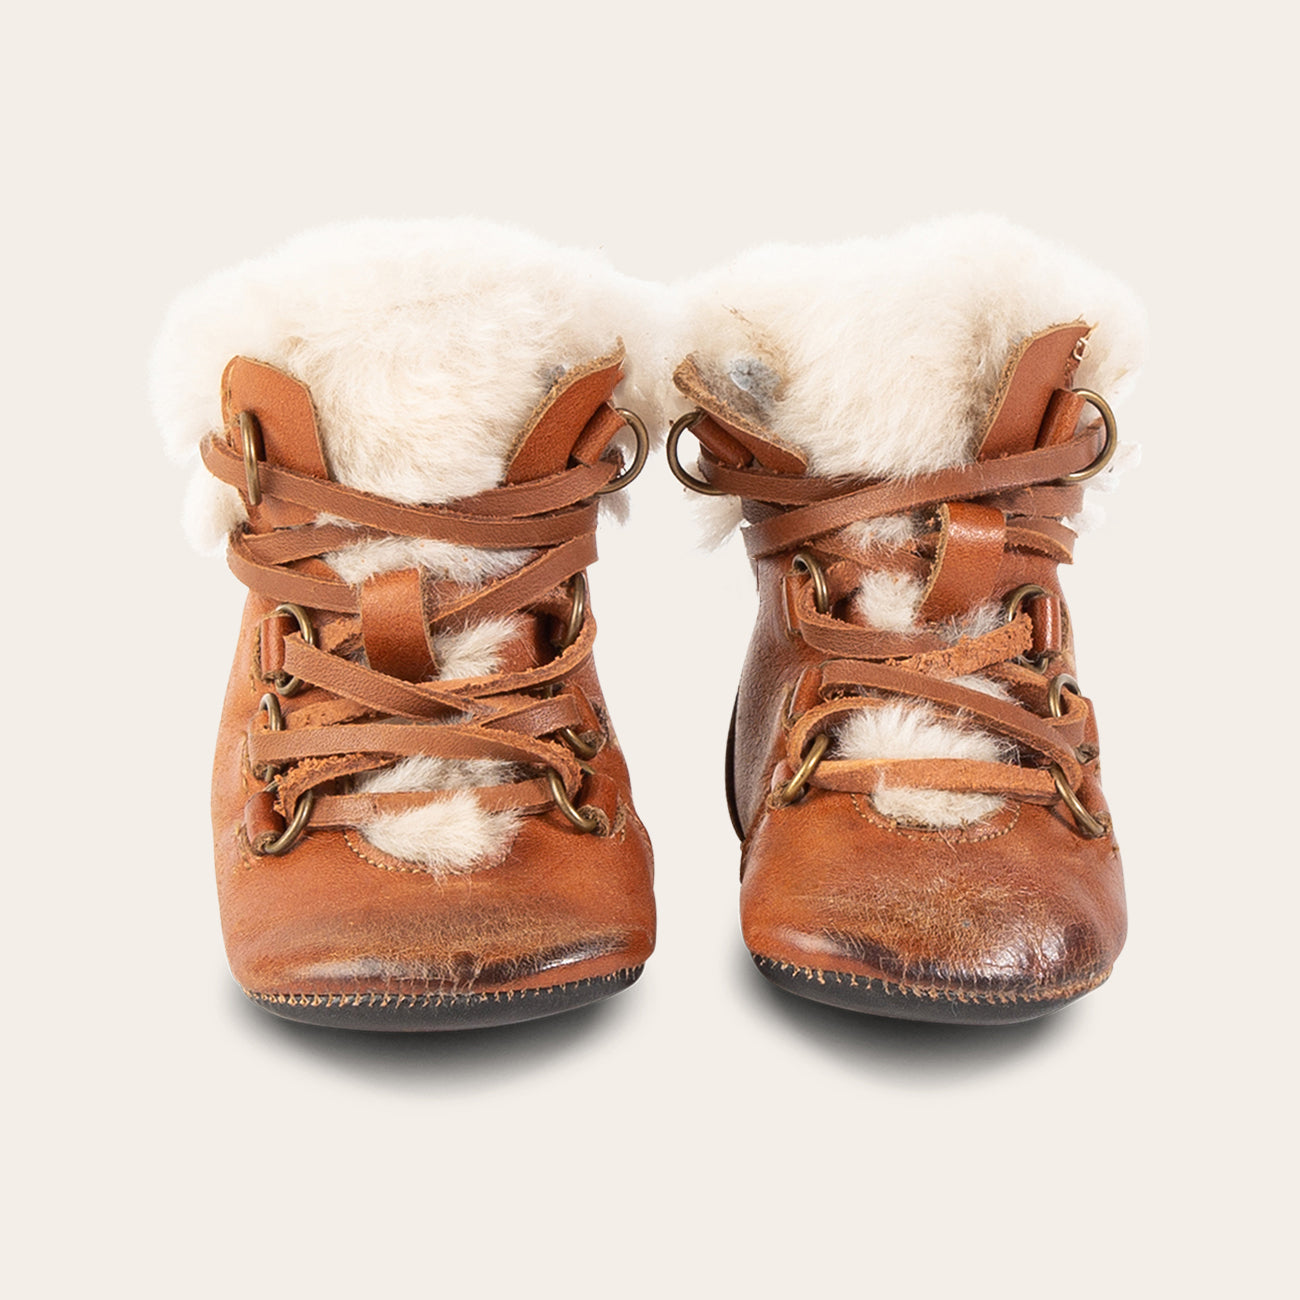 front view showing shearling lining and contrasting leather lace detailing on FREEBIRD infant baby Norway cognac leather bootie